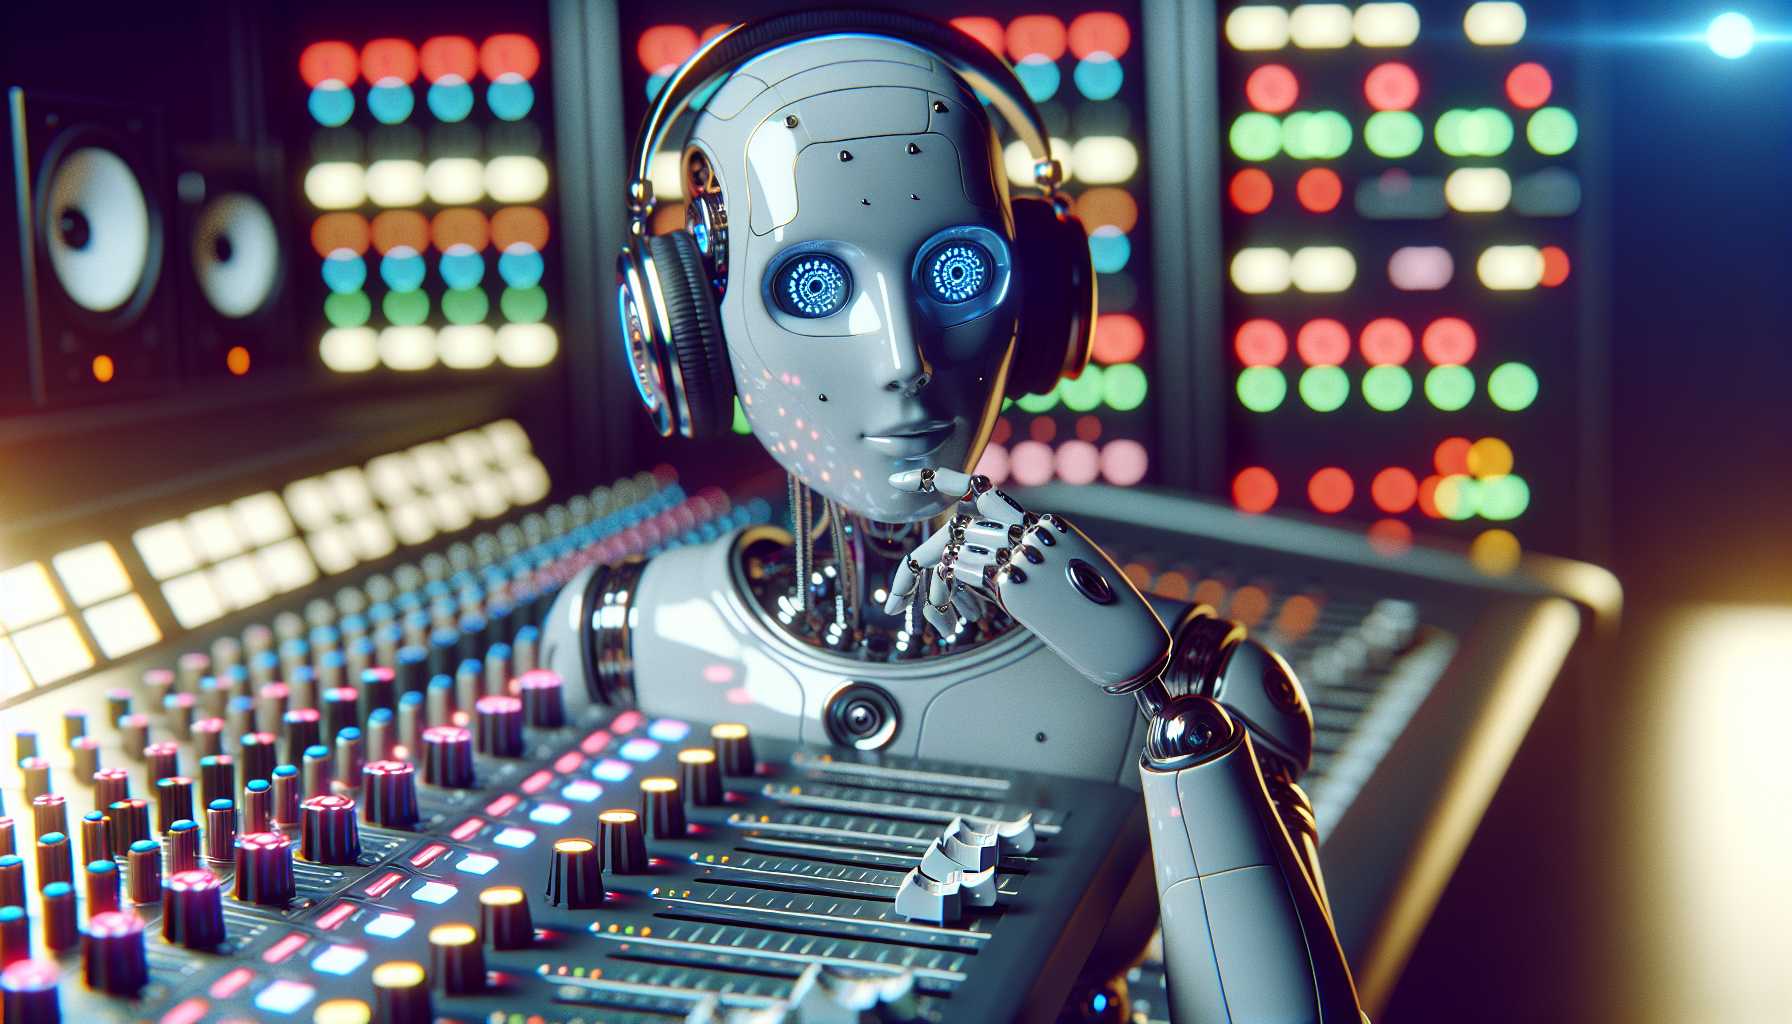 robot wearing headphones at a mixing console